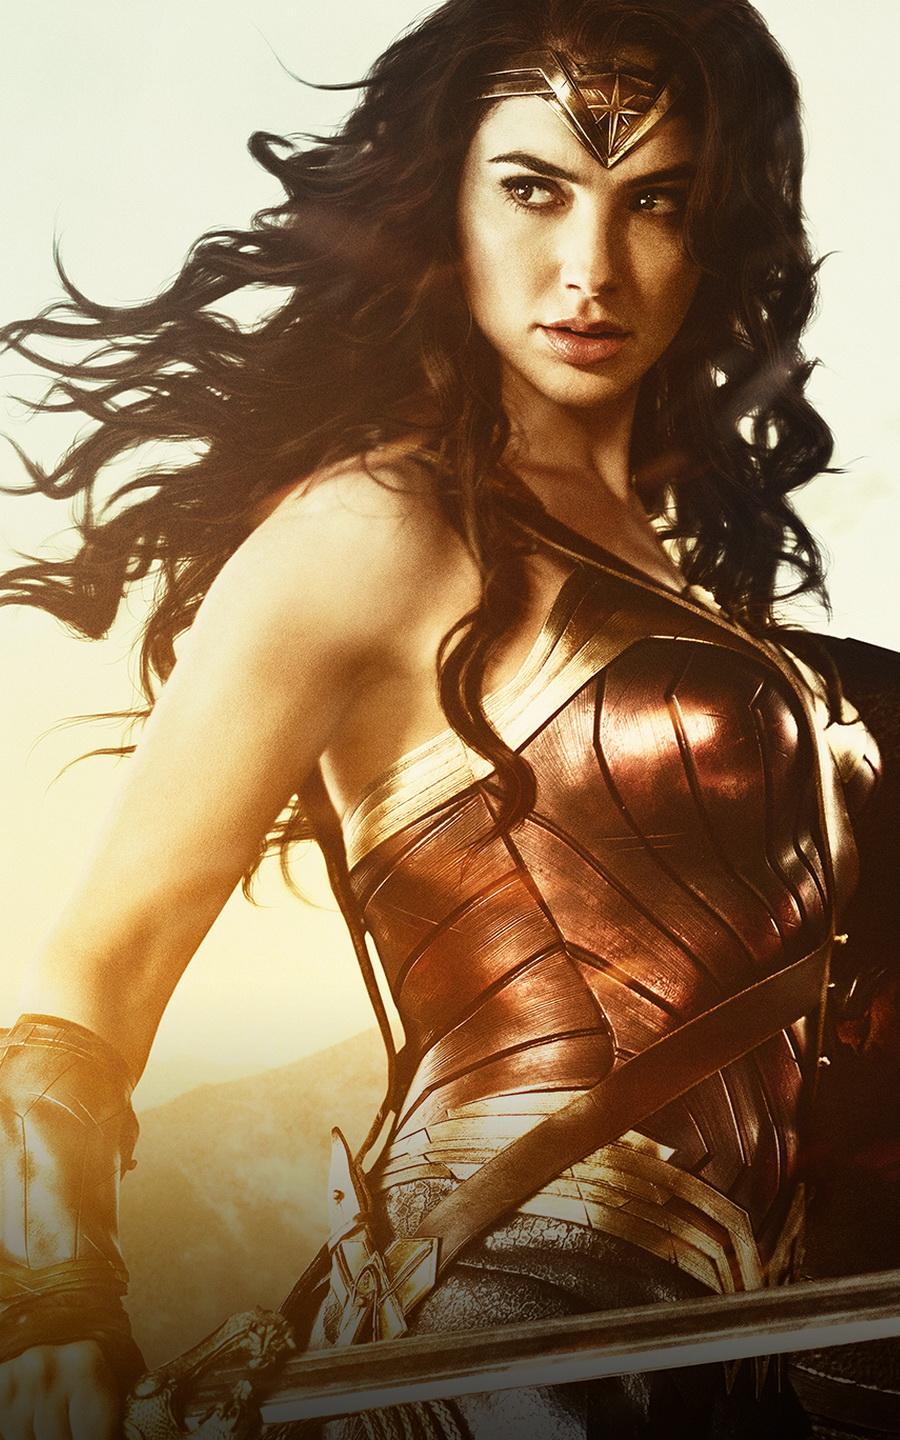 Wonder Woman Wallpaper For Android, Picture